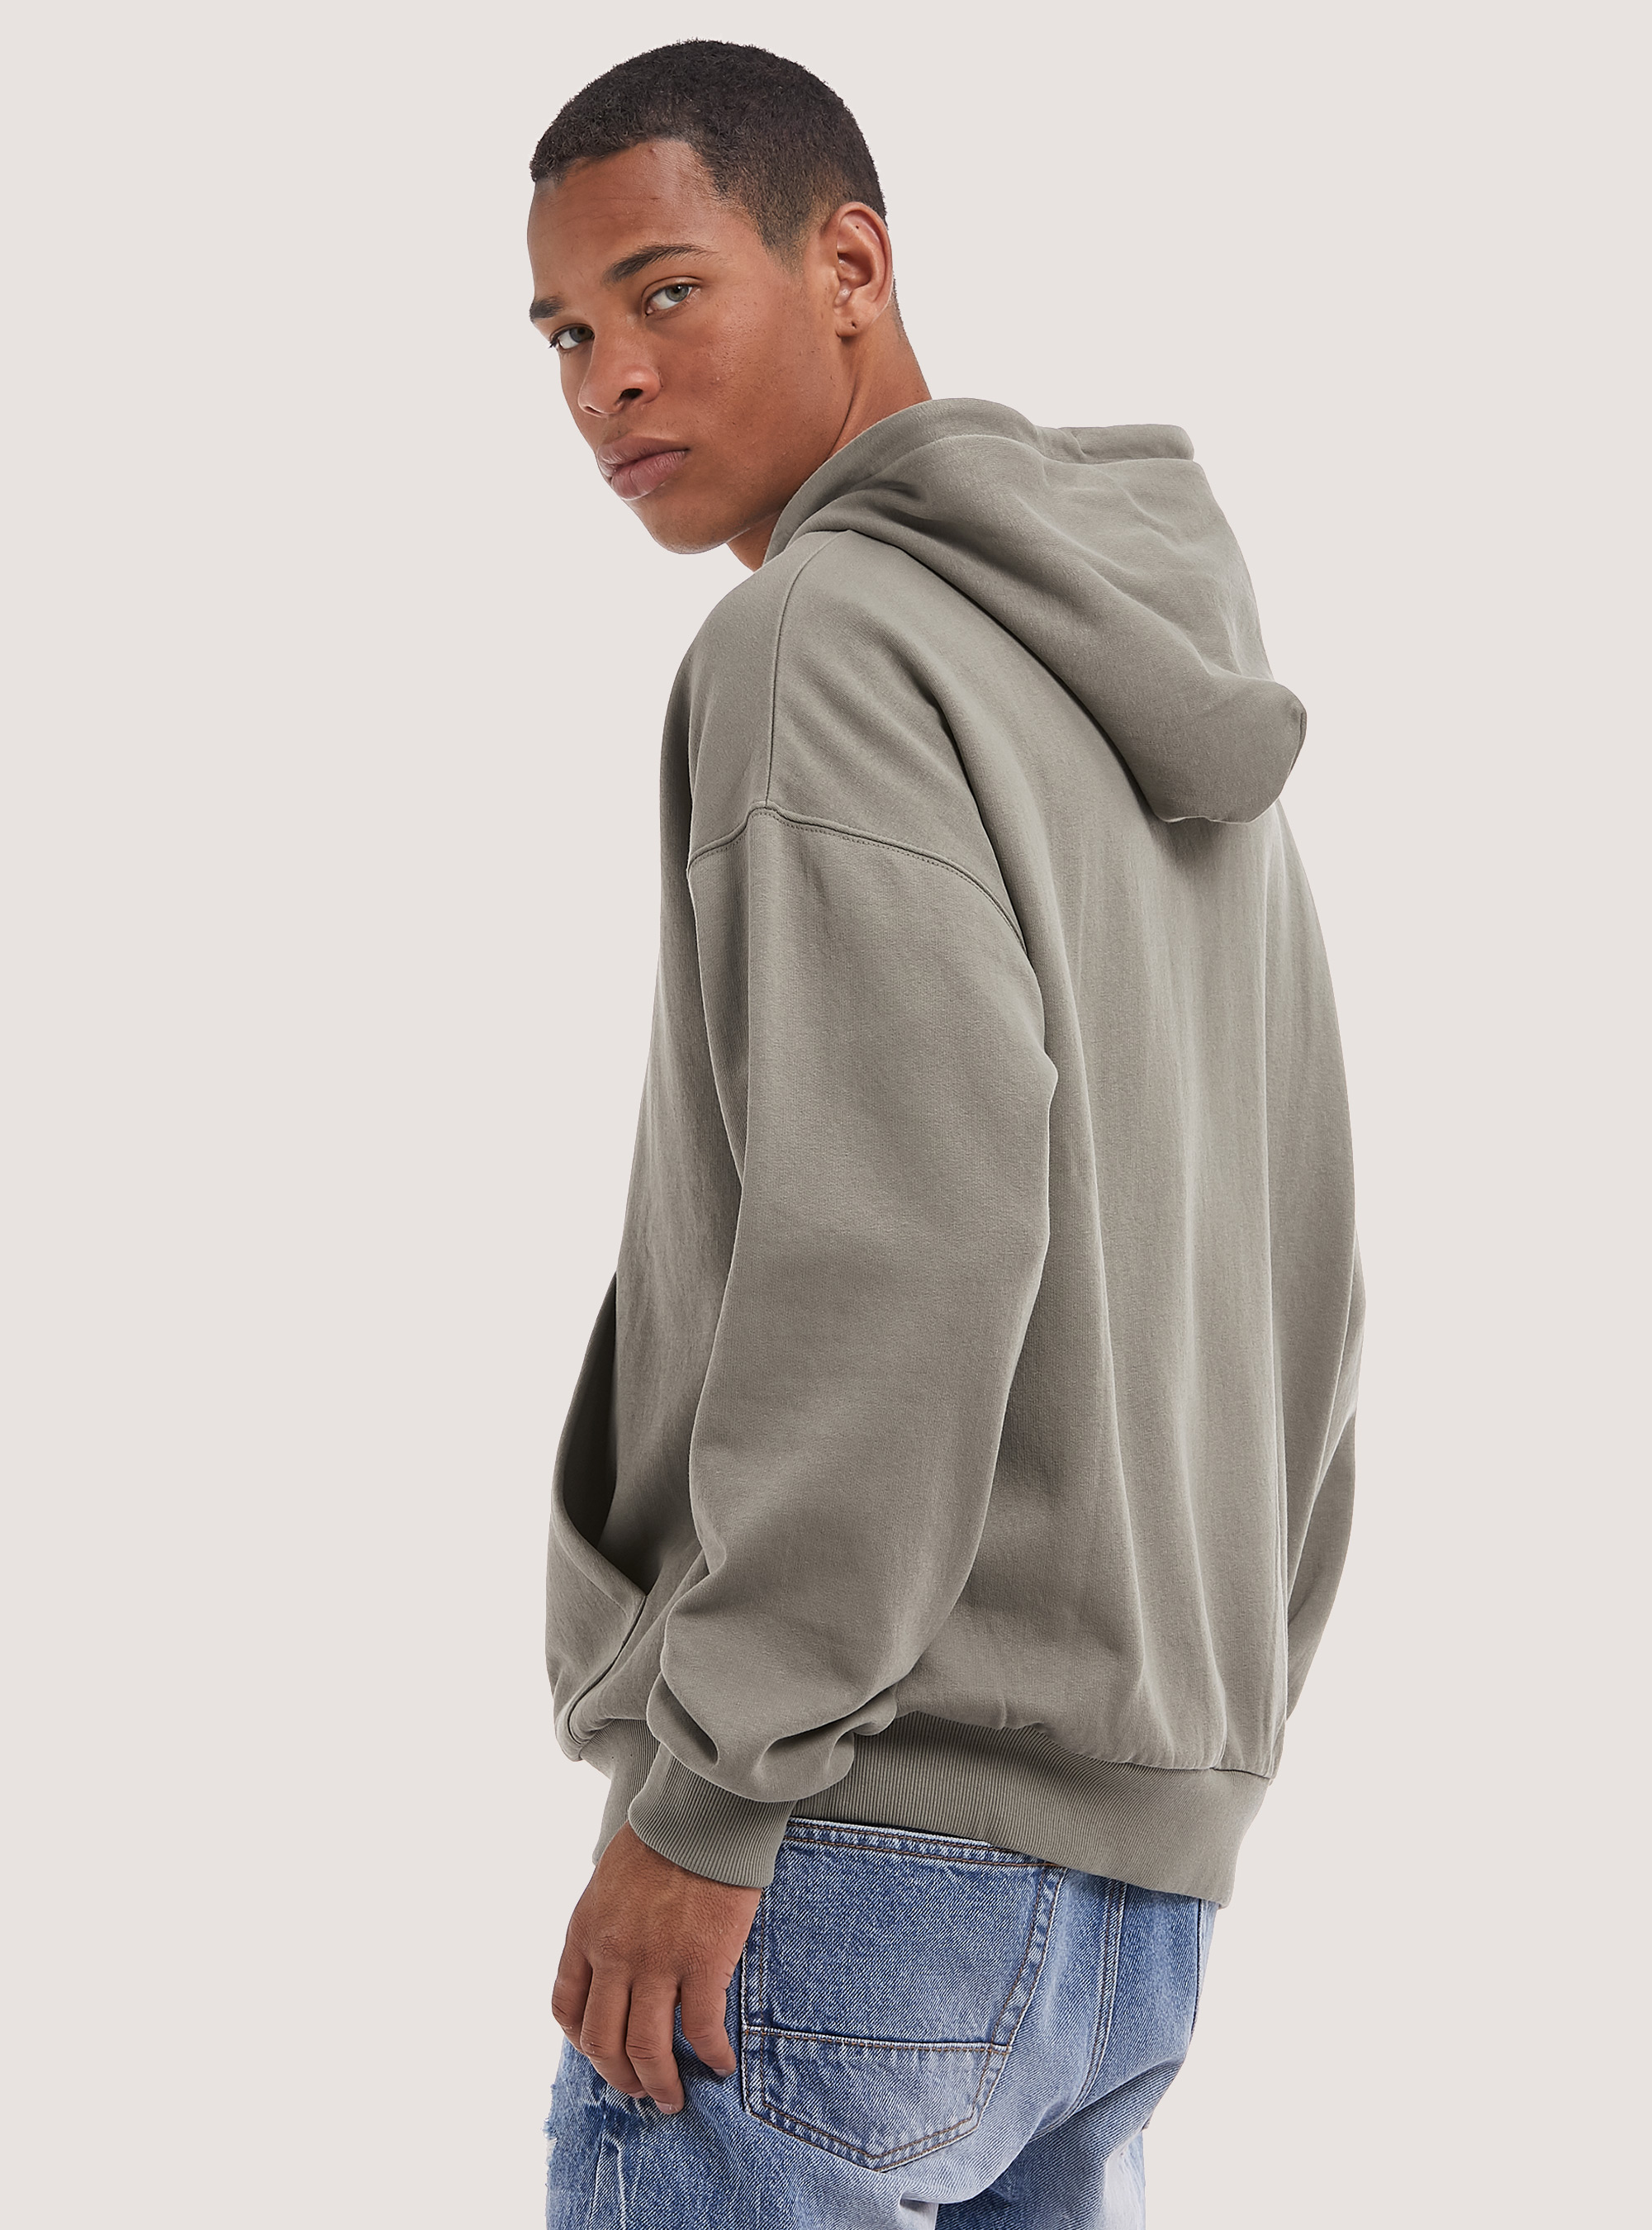 Oversized sweatshirt with pouch pocket and hood